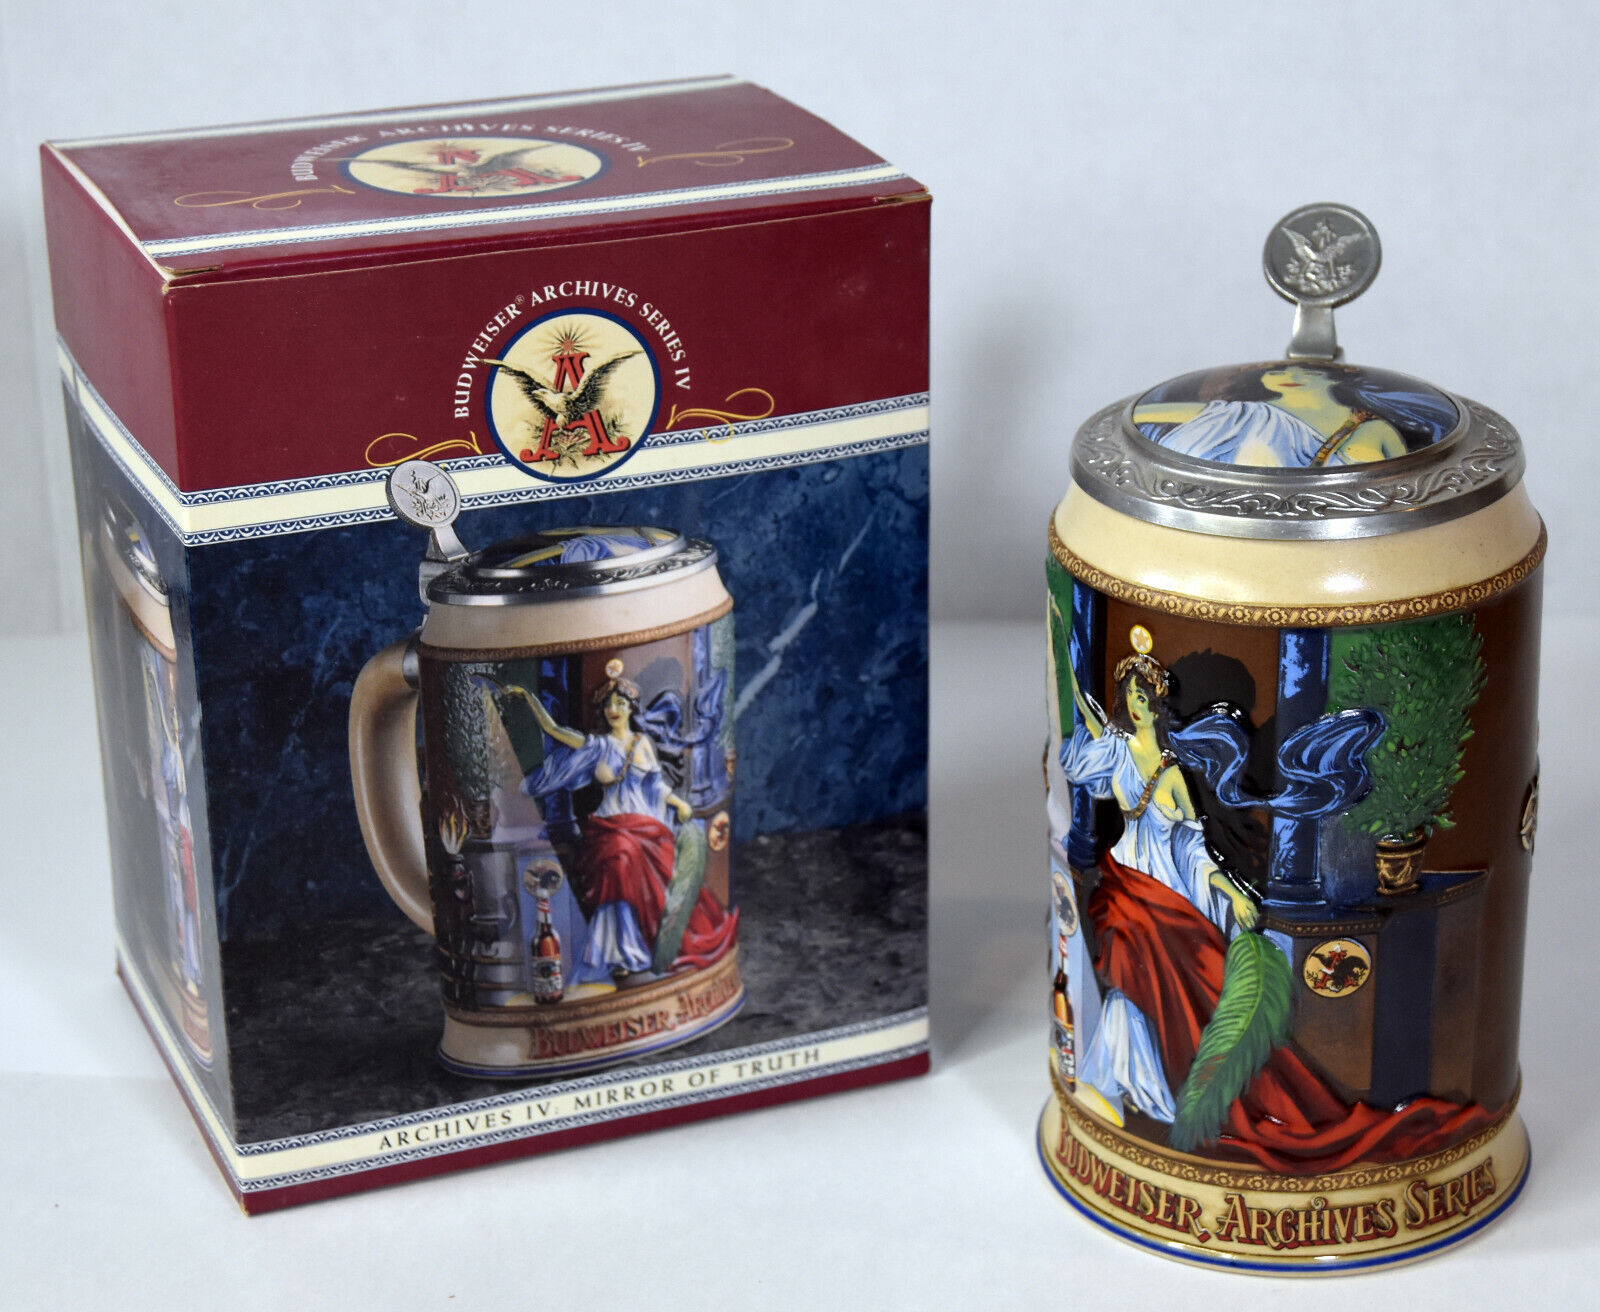 1995 Vintage Handcrafted Beer Stein Budweiser Mirror of Truth Archives Series 